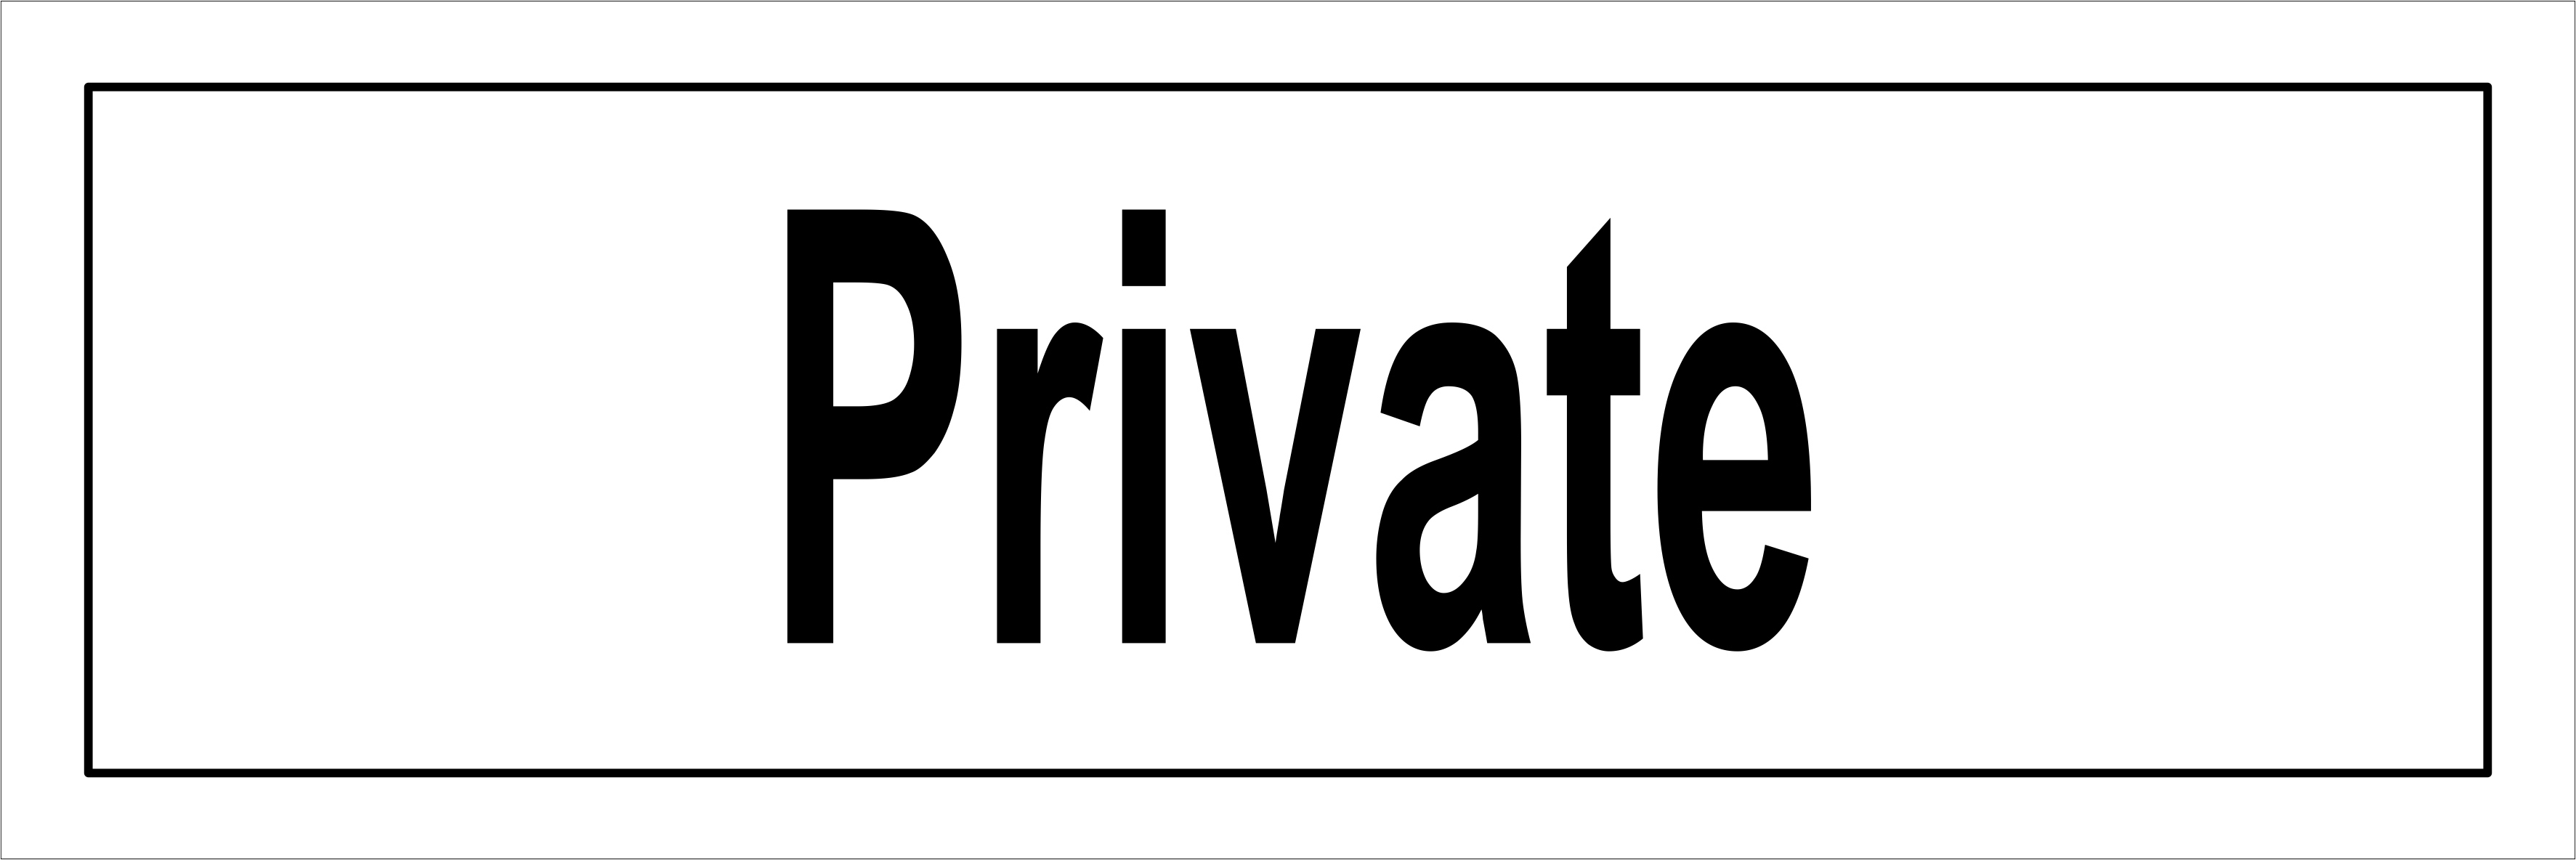 Private - ISPS Code Signs - Safeway Systems